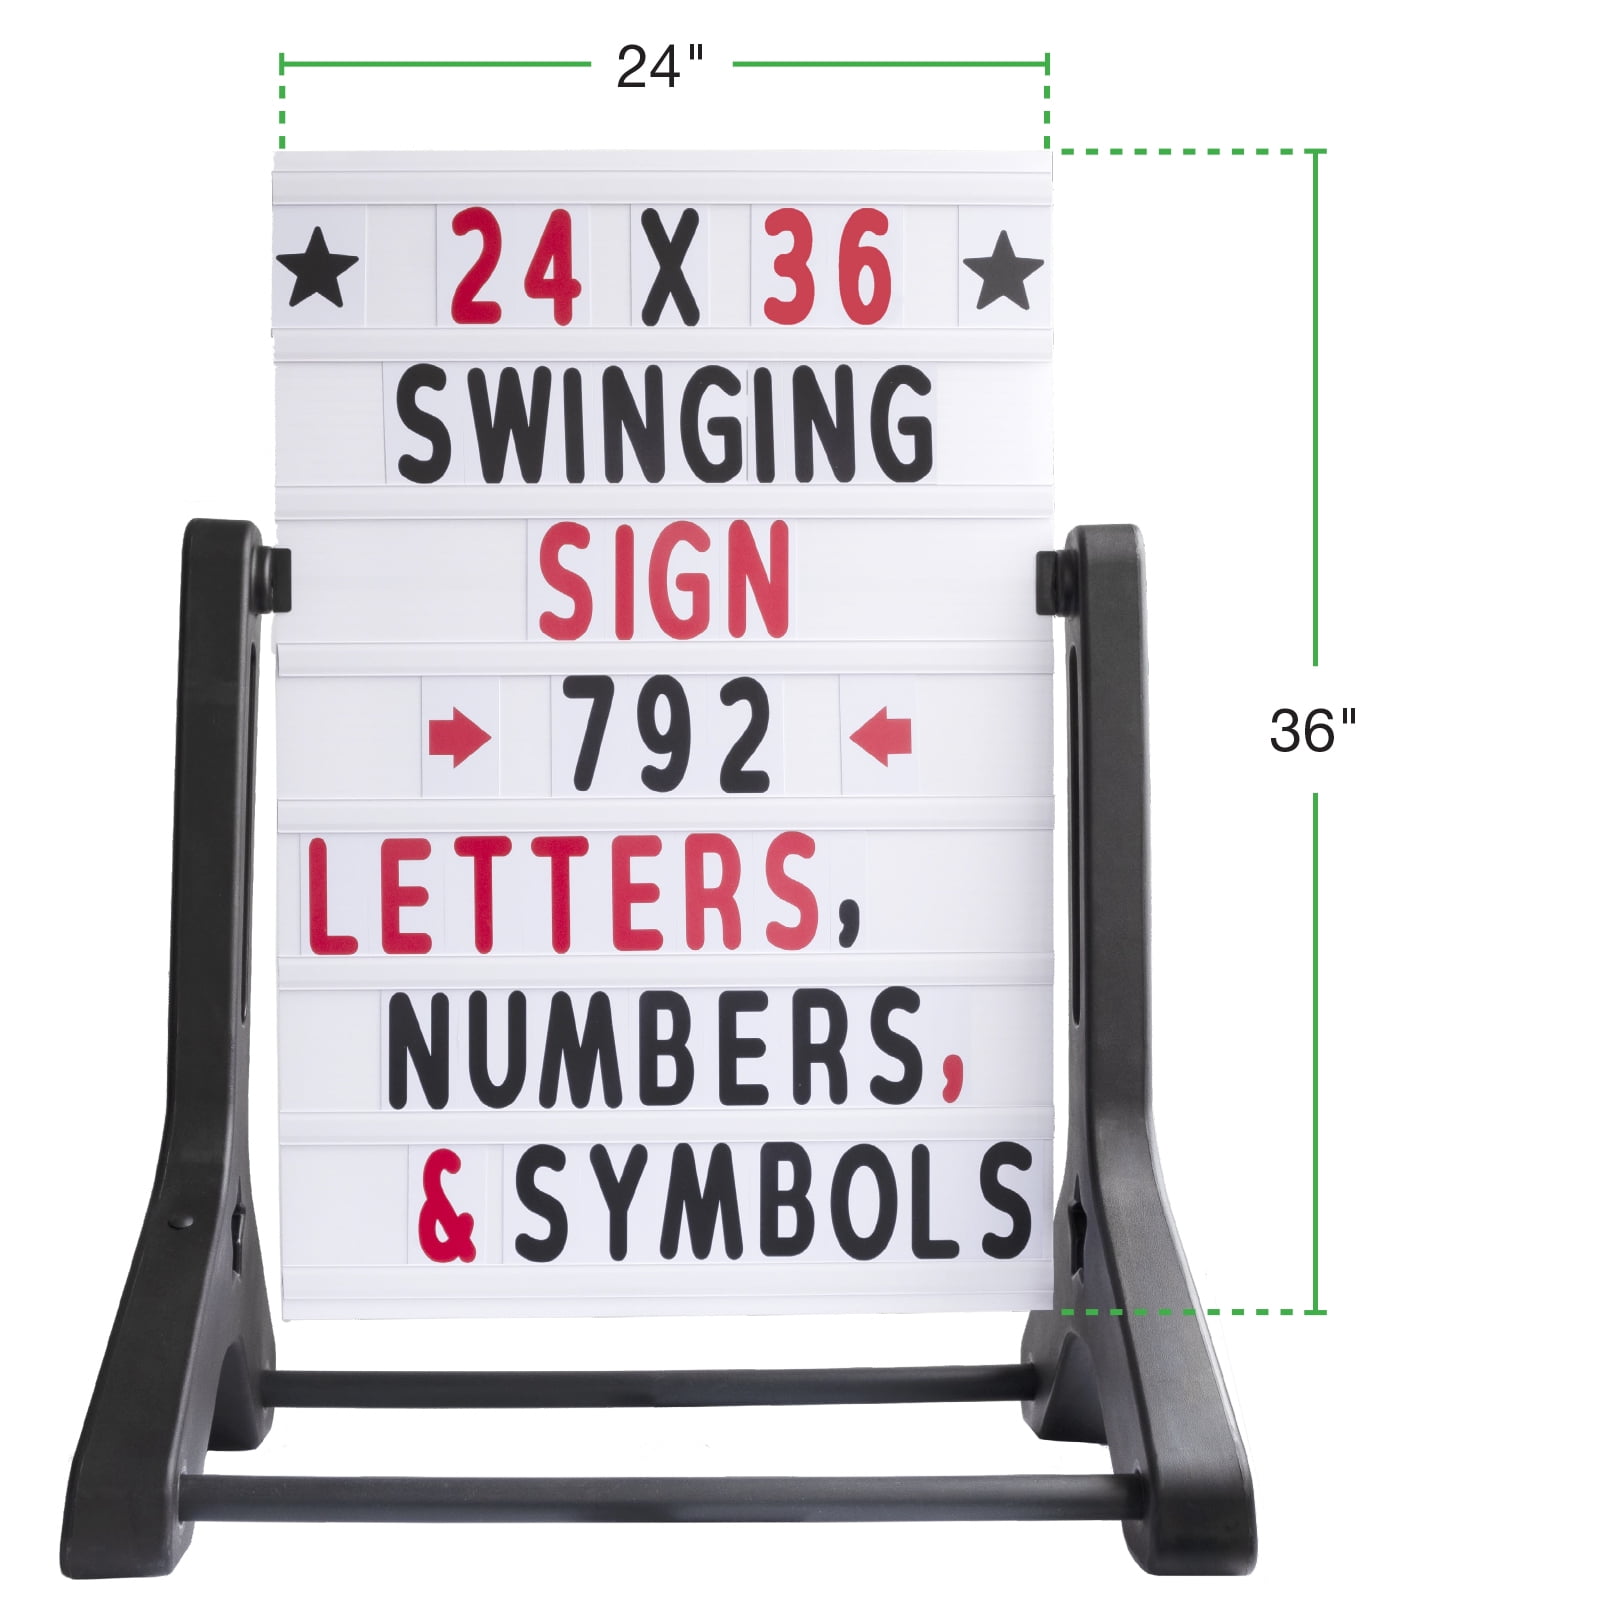 421 - 5 Letters & Numbers Set for XL Massage Board Sign